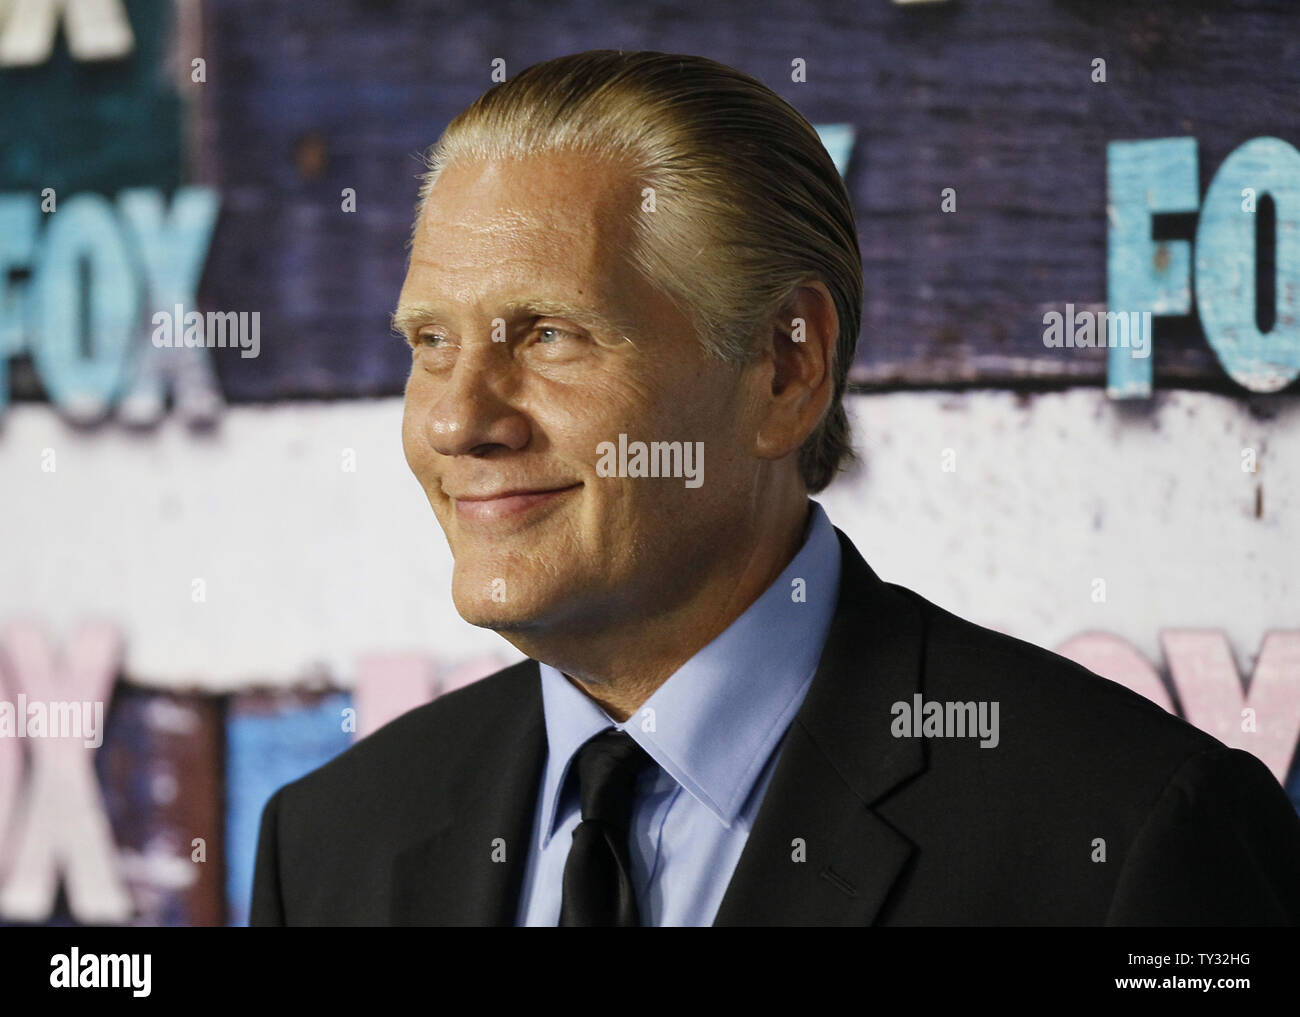 Actor William Forsythe attends the Fox All-Star Party in Los Angeles on July 23, 2012.  UPI/Danny Moloshok Stock Photo